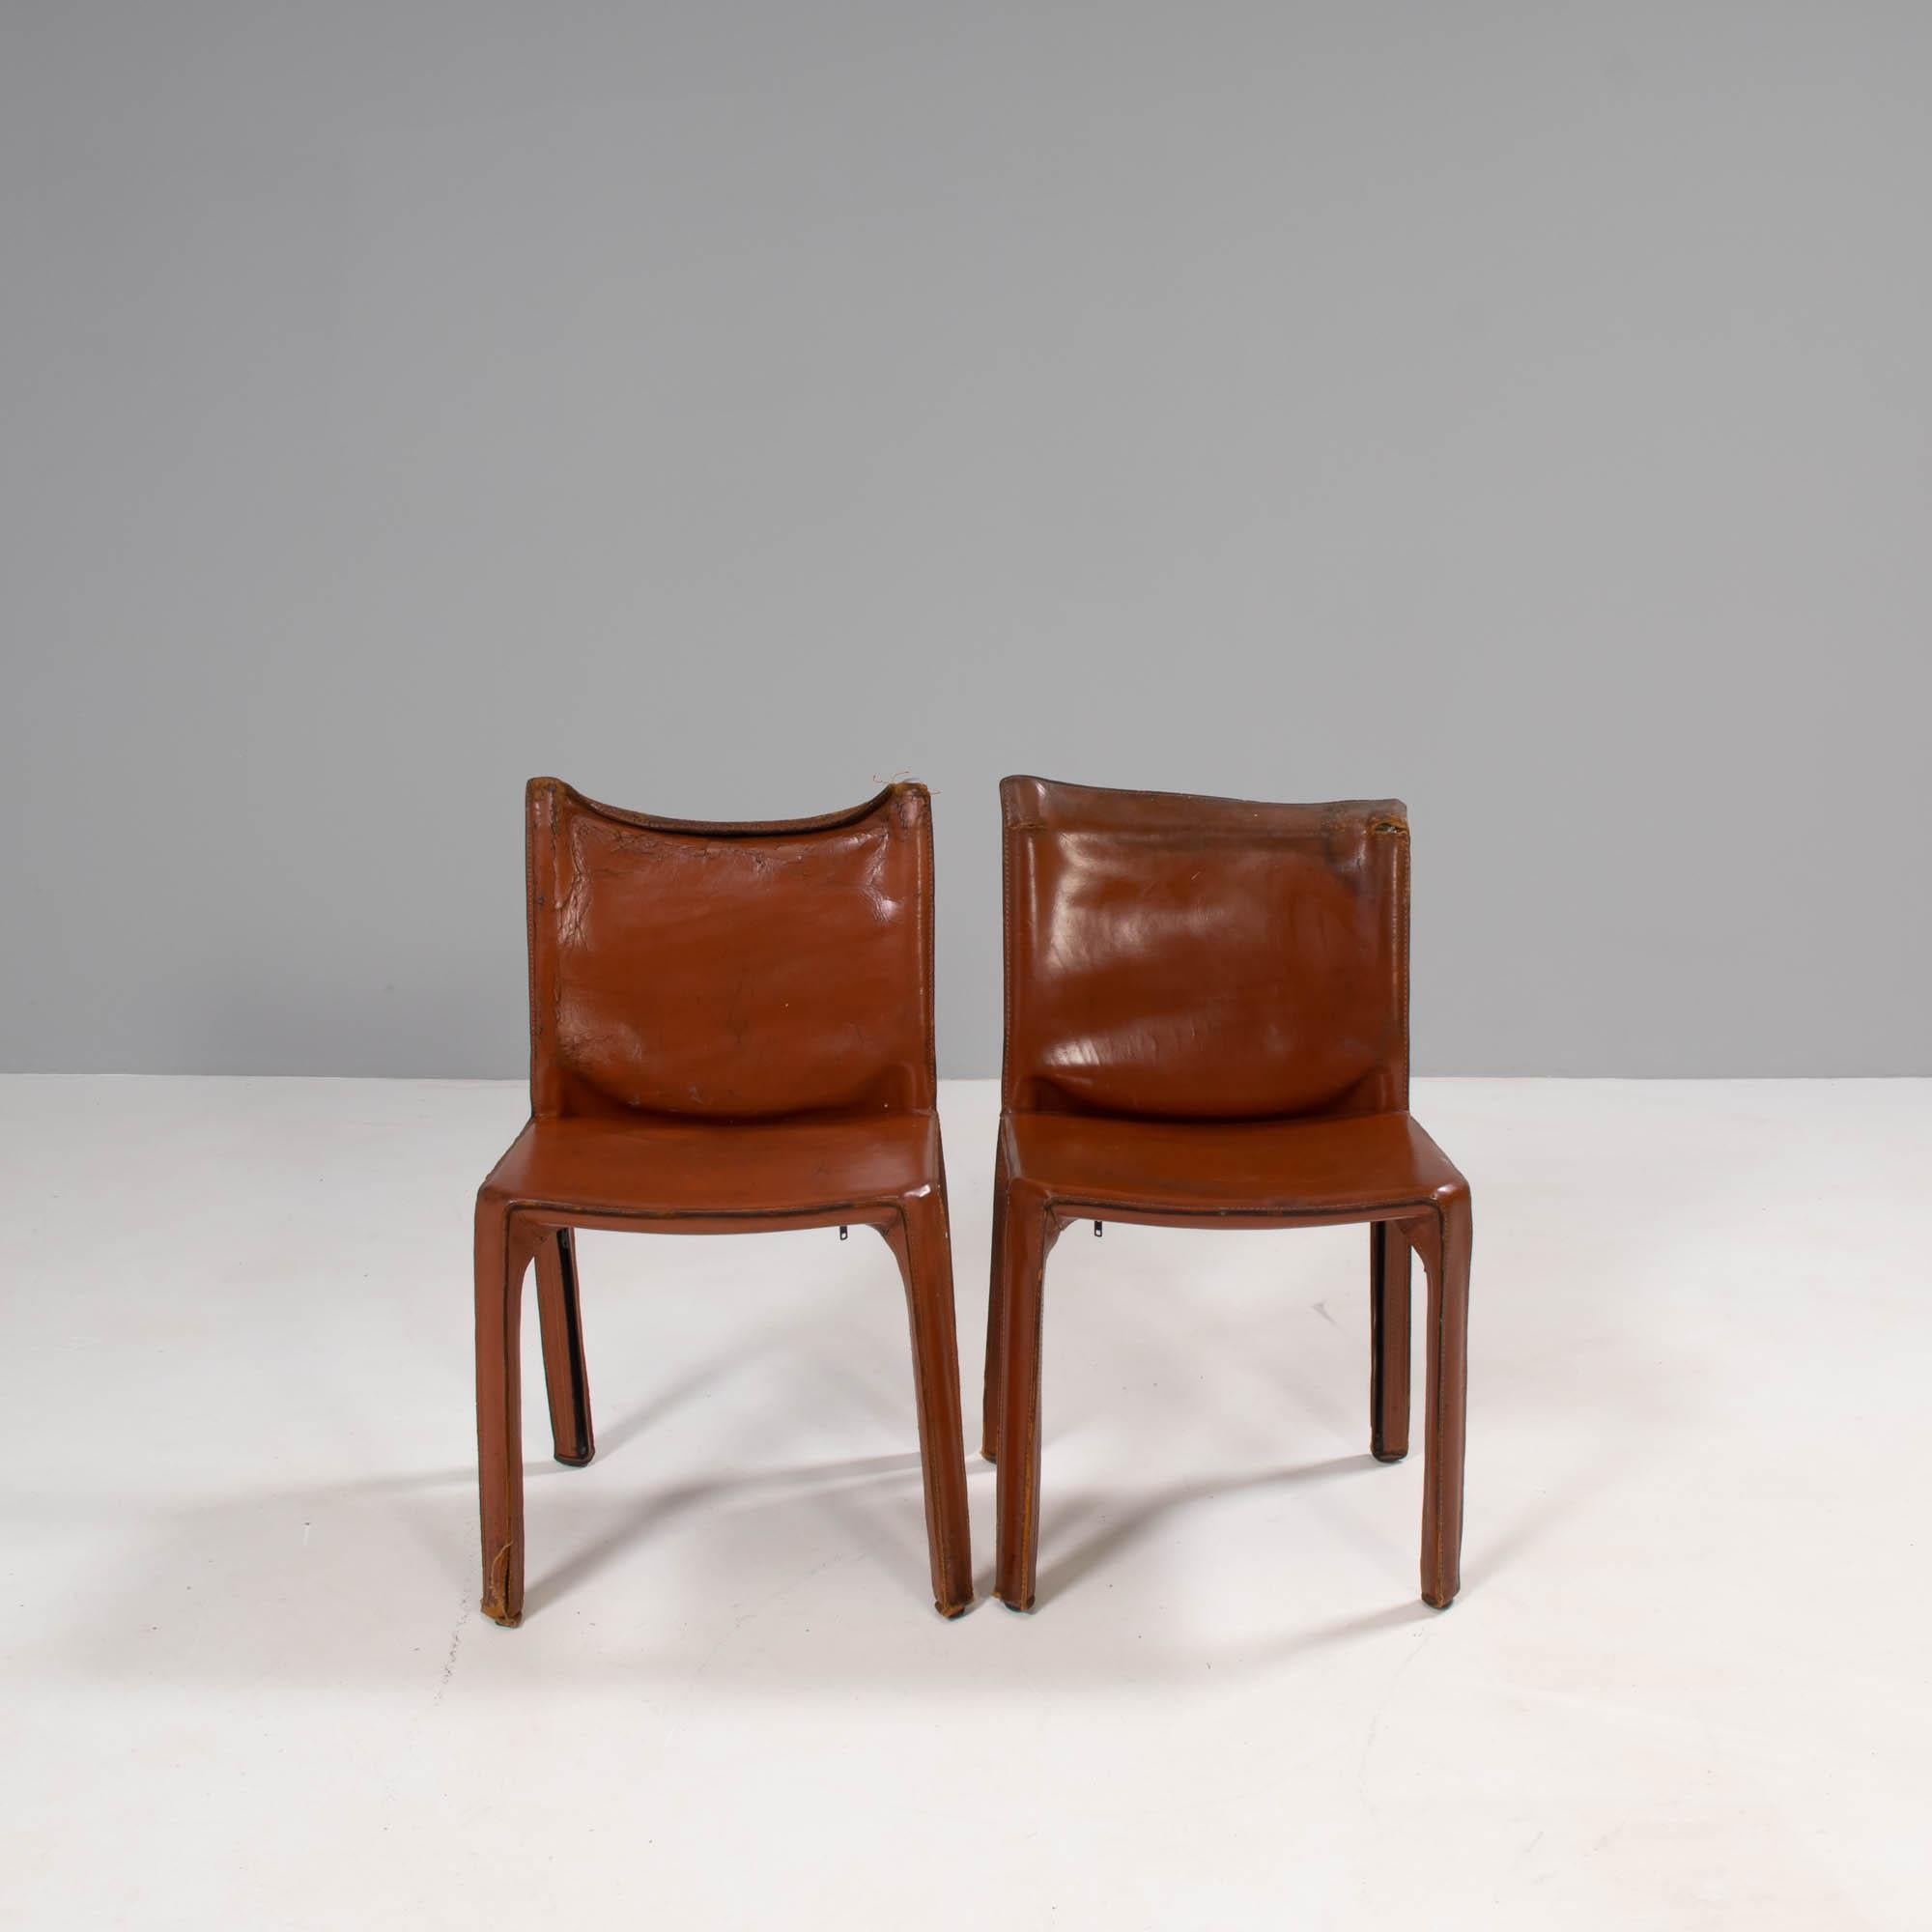 Designed by Mario Bellini in 1977, the Cab dining chairs have since become a signature piece in the Cassina furniture collection.

These original 190s dining chairs are constructed from a steel frame and are covered in cognac leather upholstery,